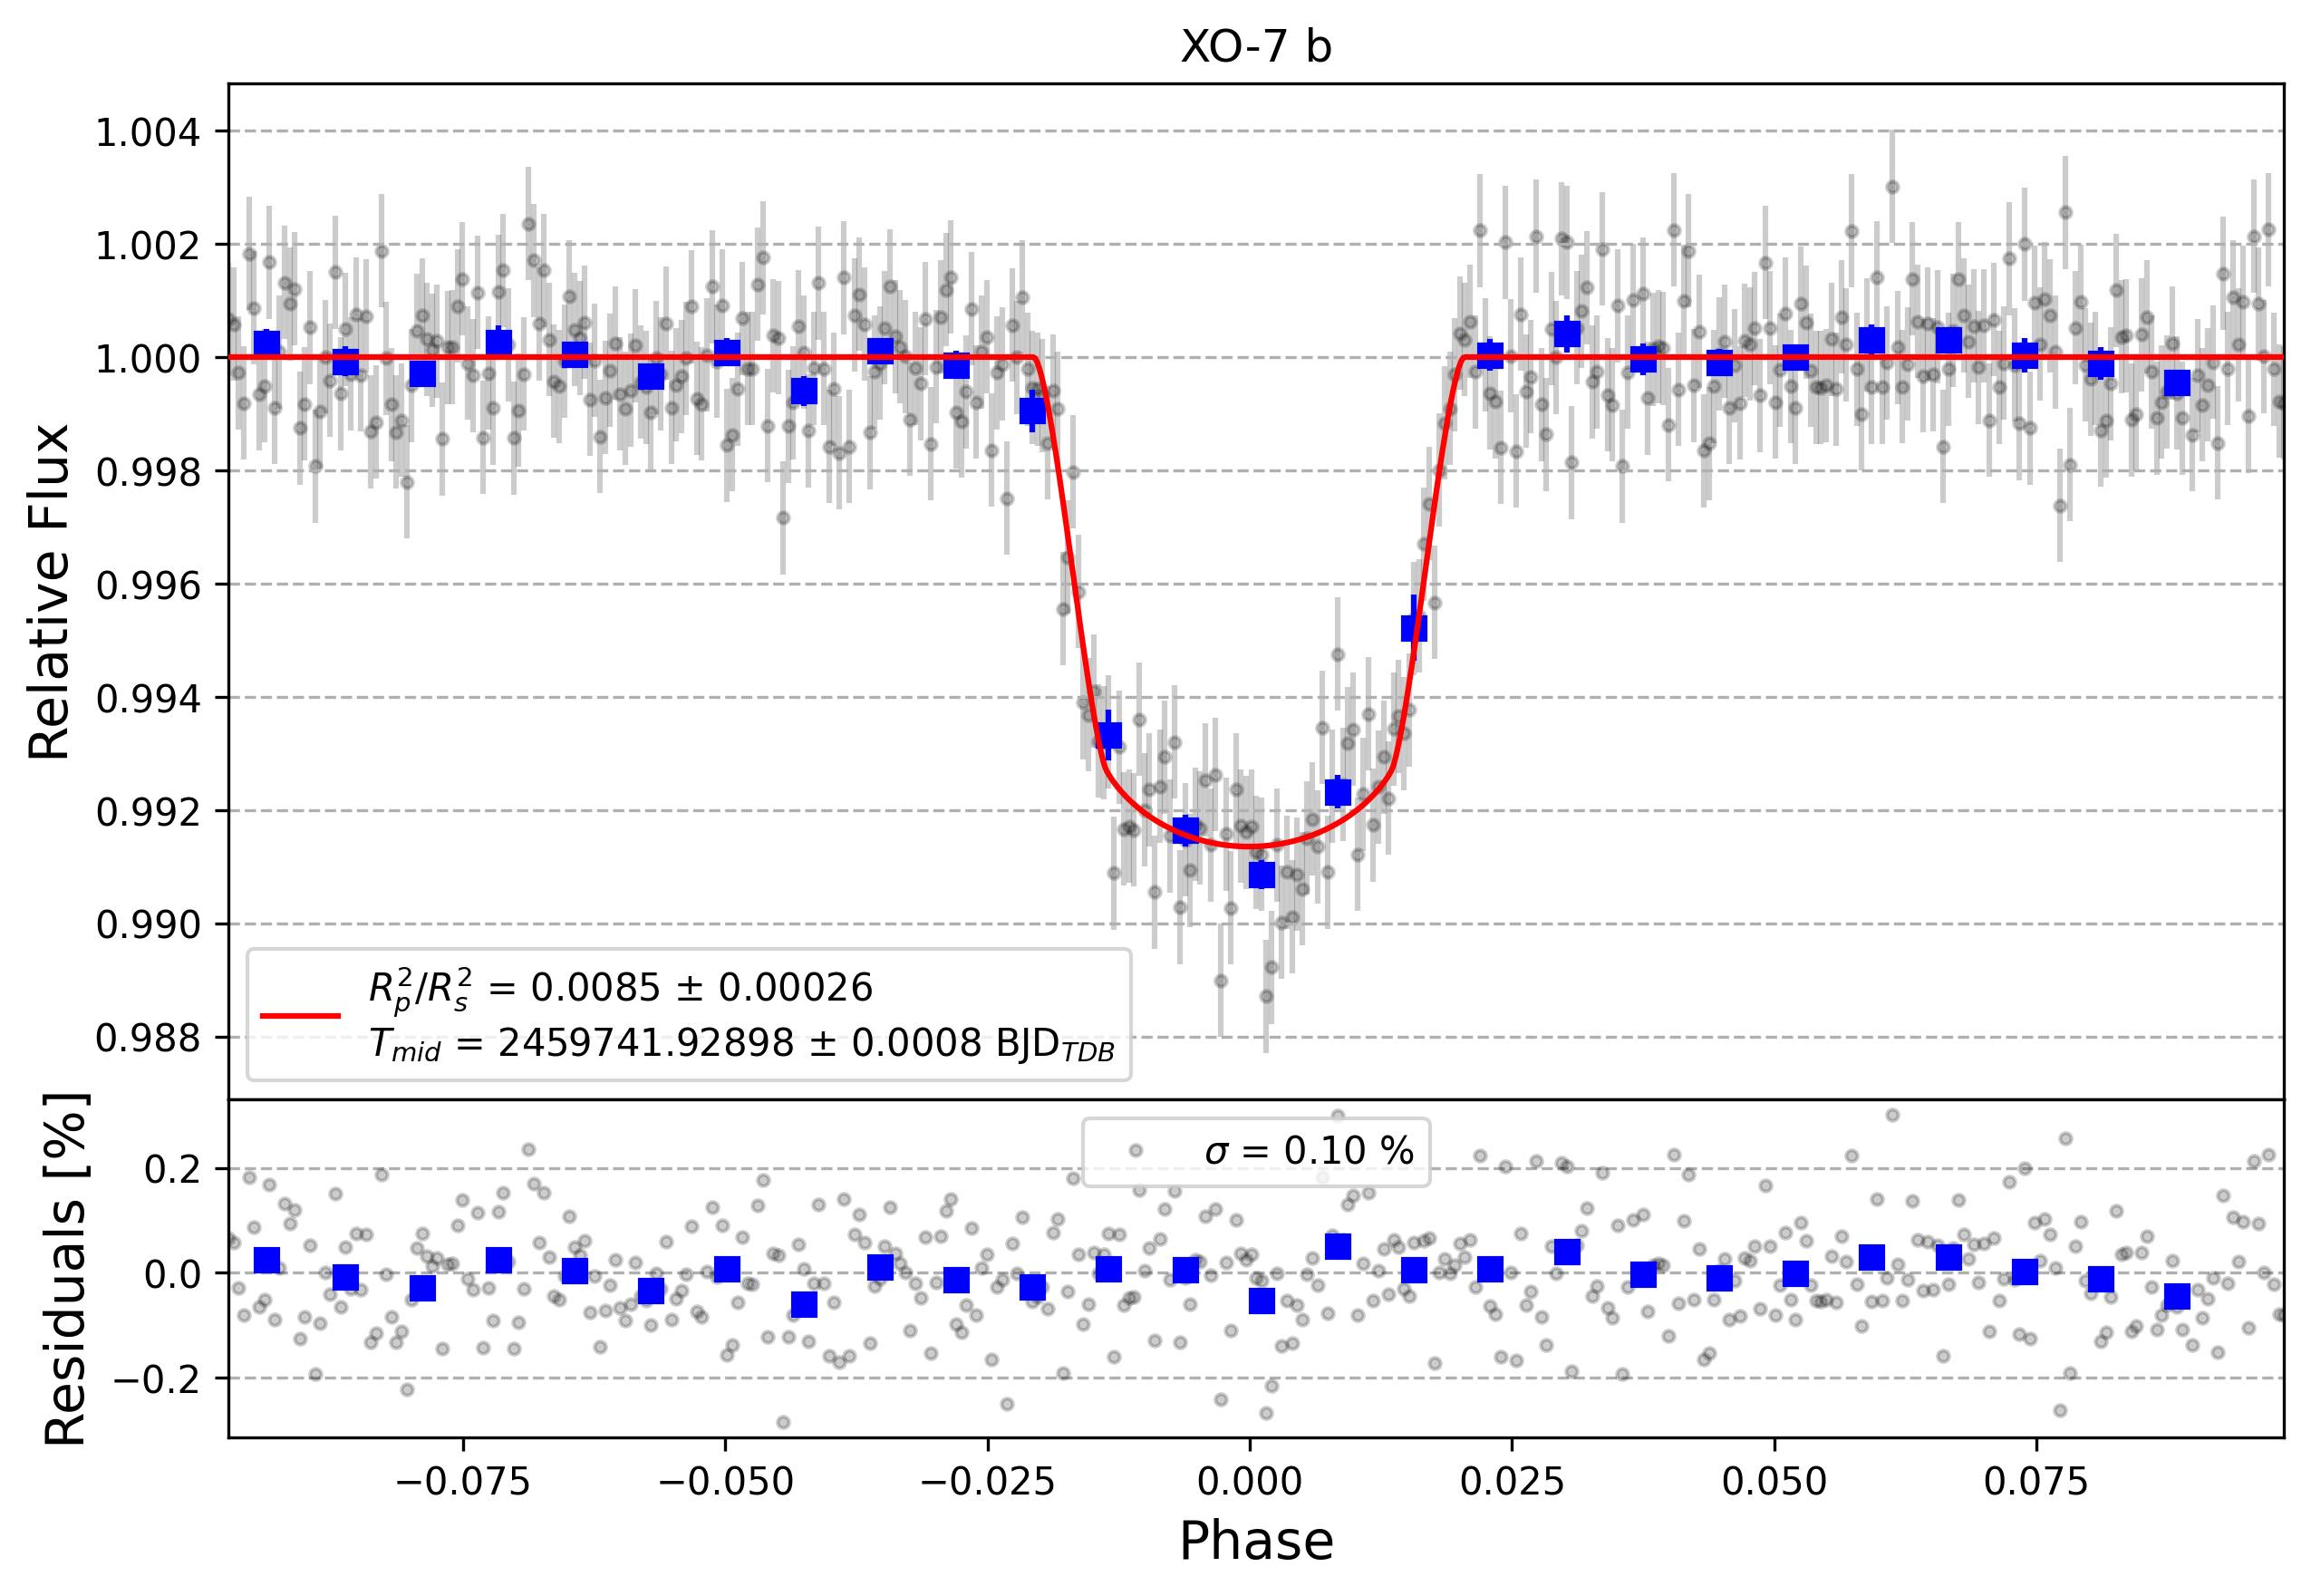 Light curve chart for 57ae510c1b79bff9ede44a0a254390f2